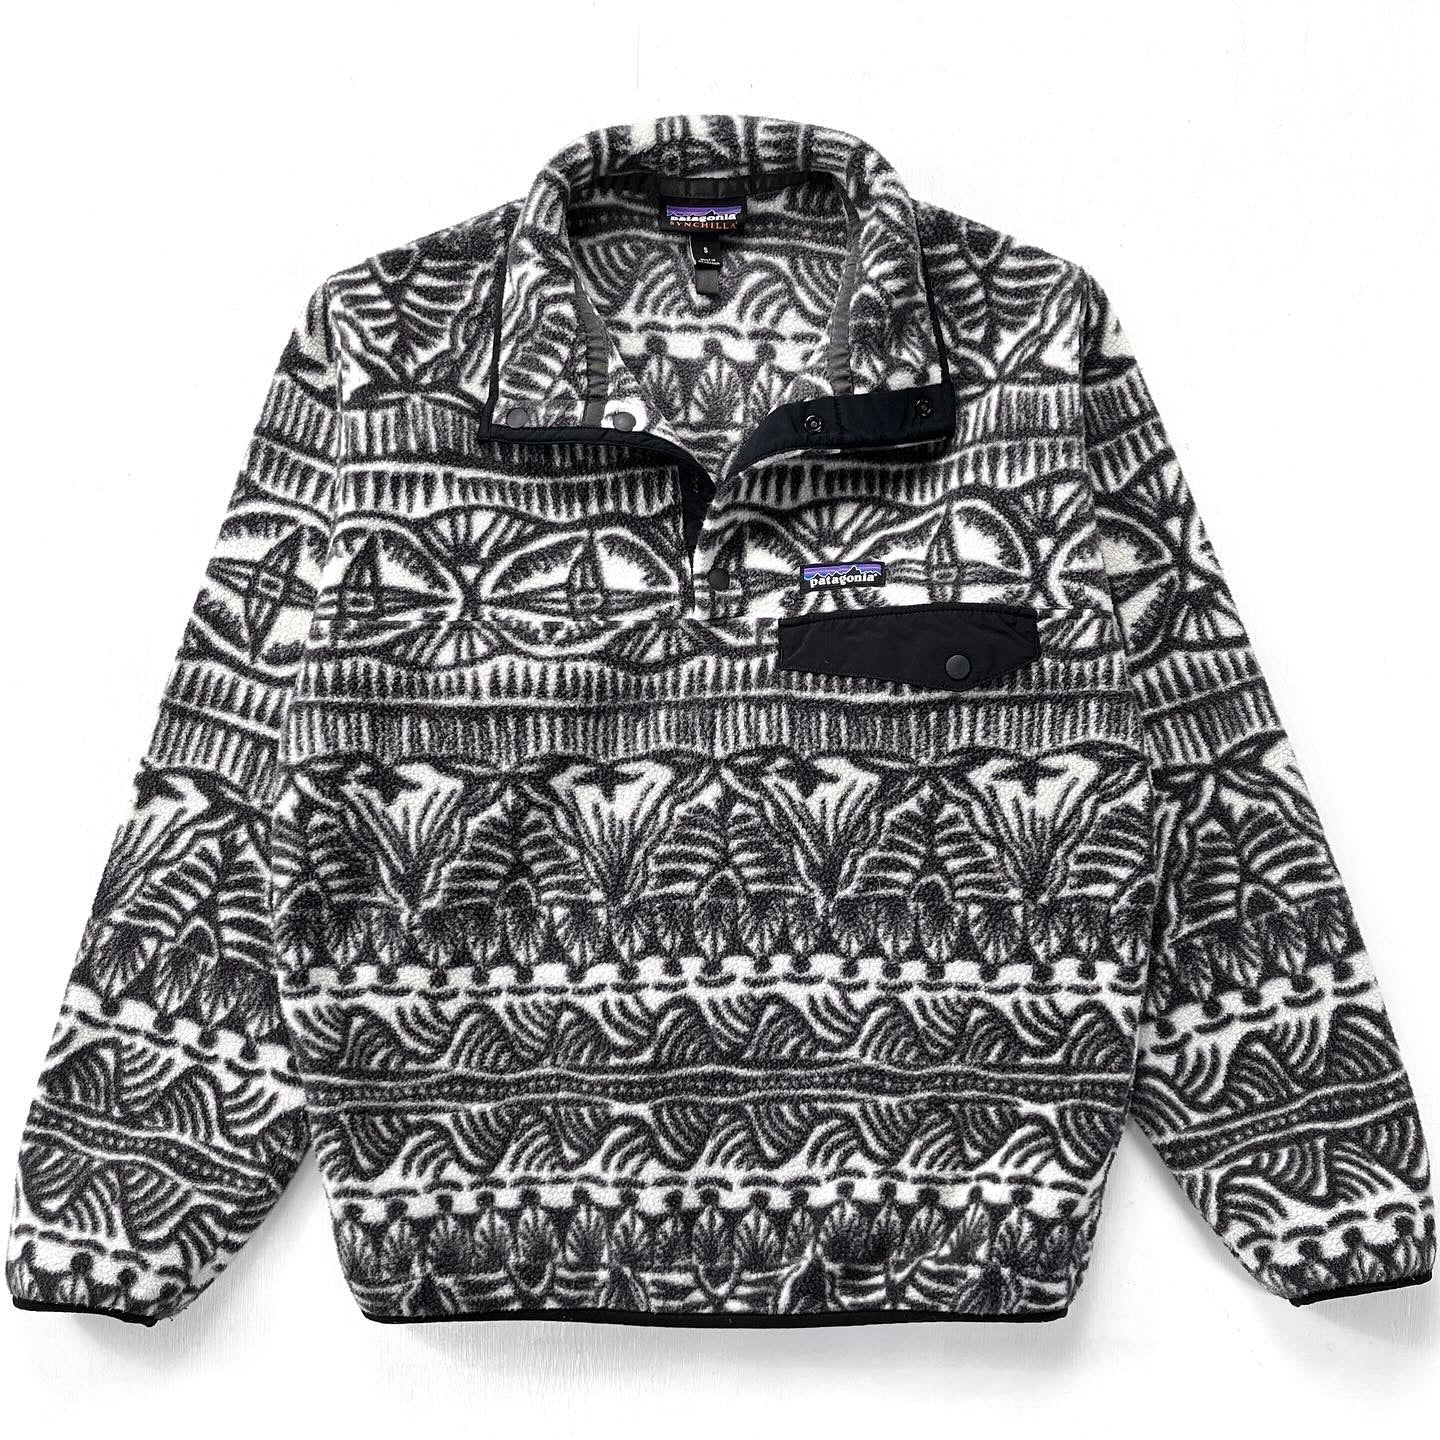 2019 Patagonia Printed Synchilla Snap-T, Tradewinds: Ink Black (S)